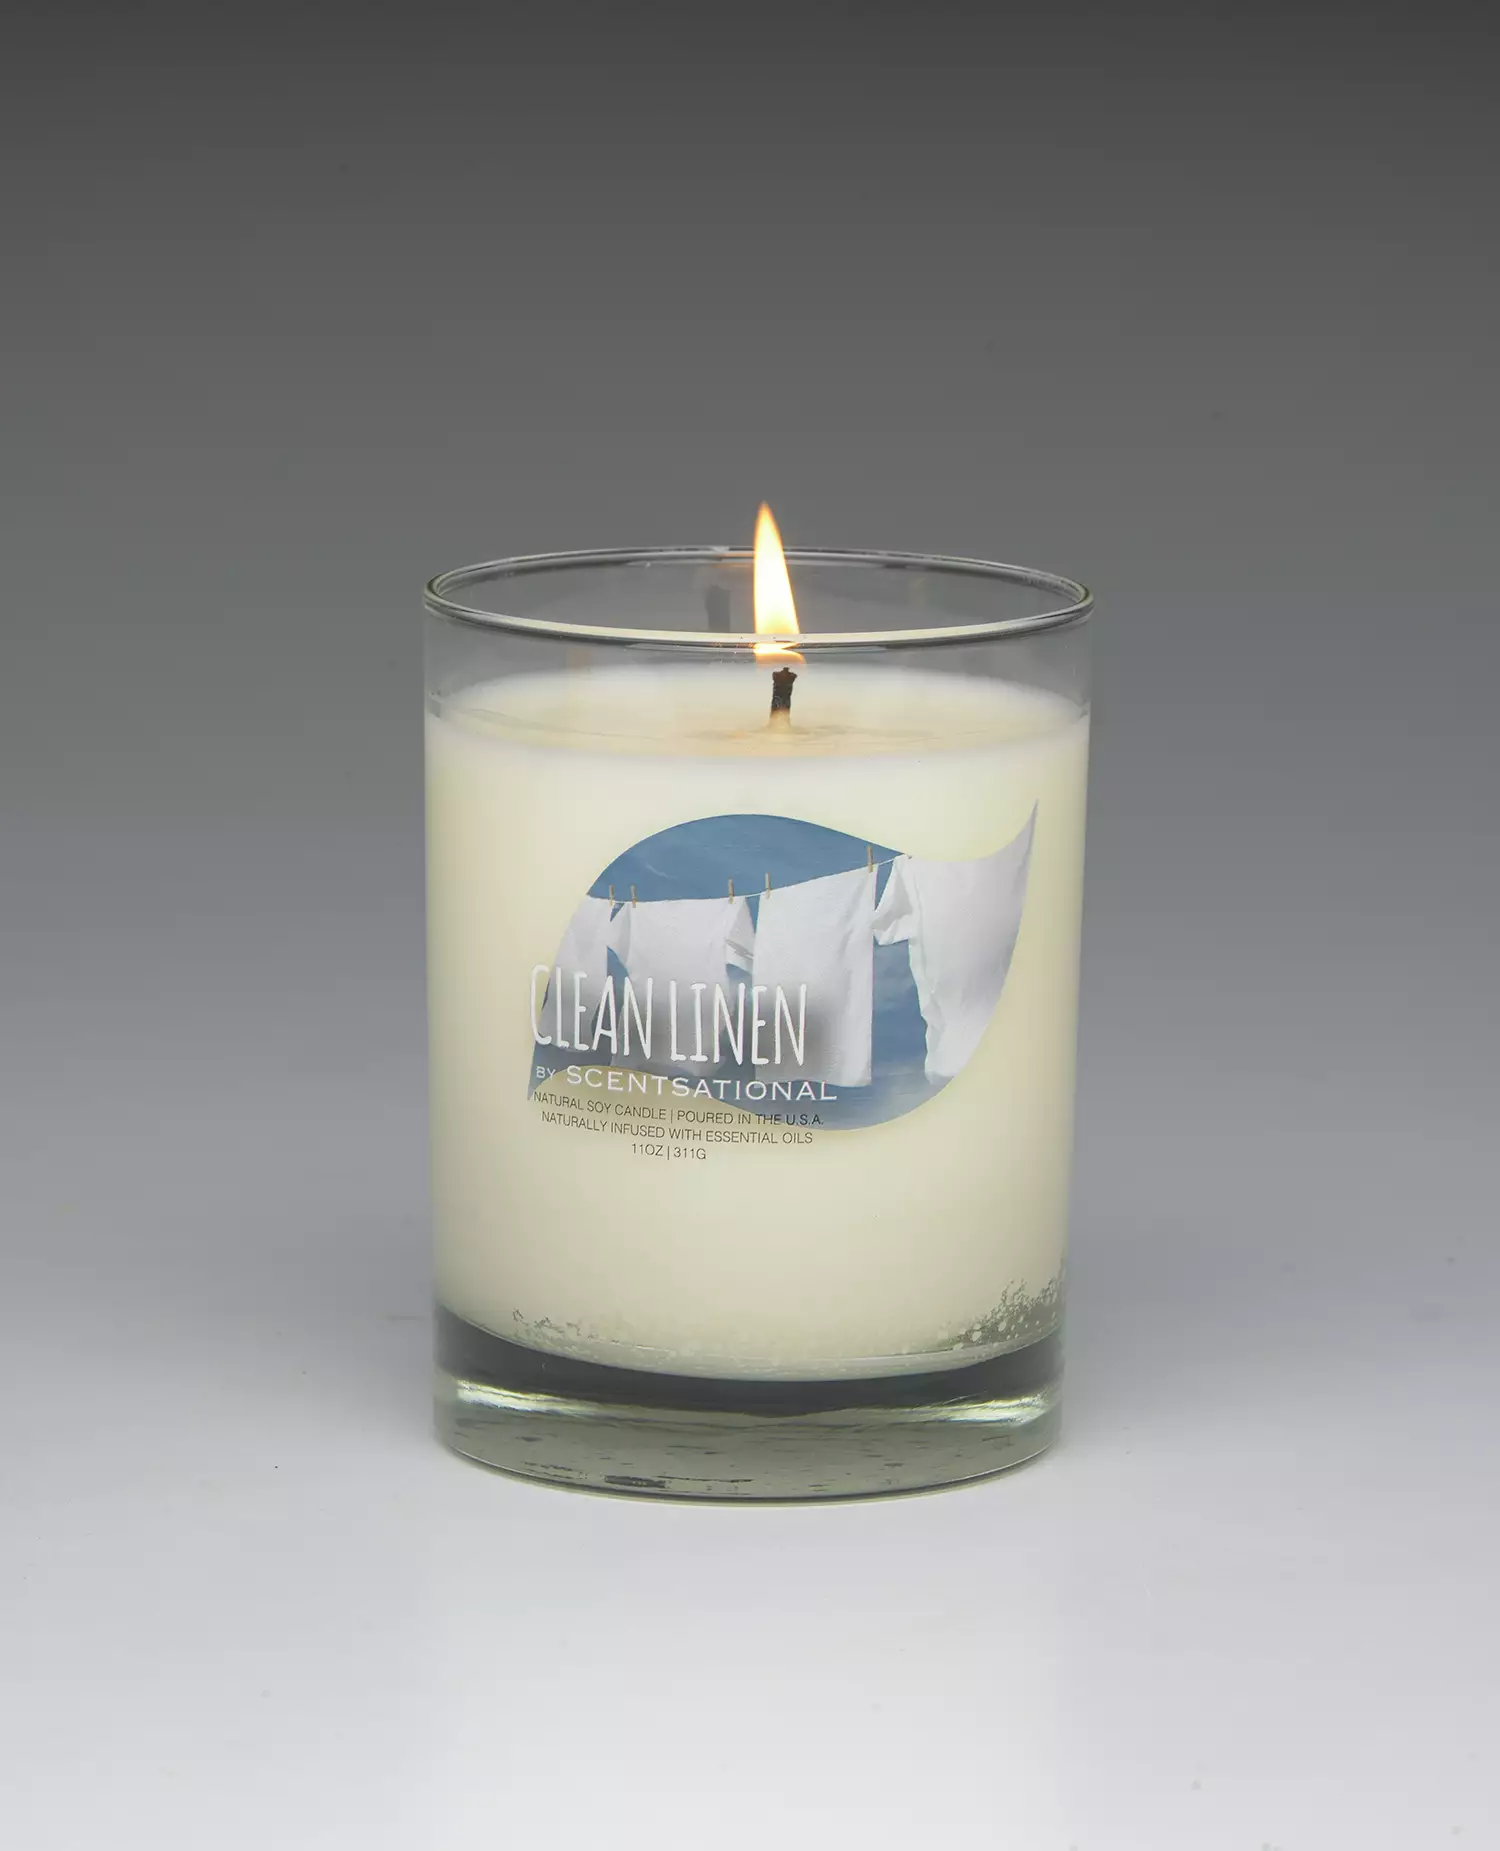 Clean Linen – 11oz scented candle burning